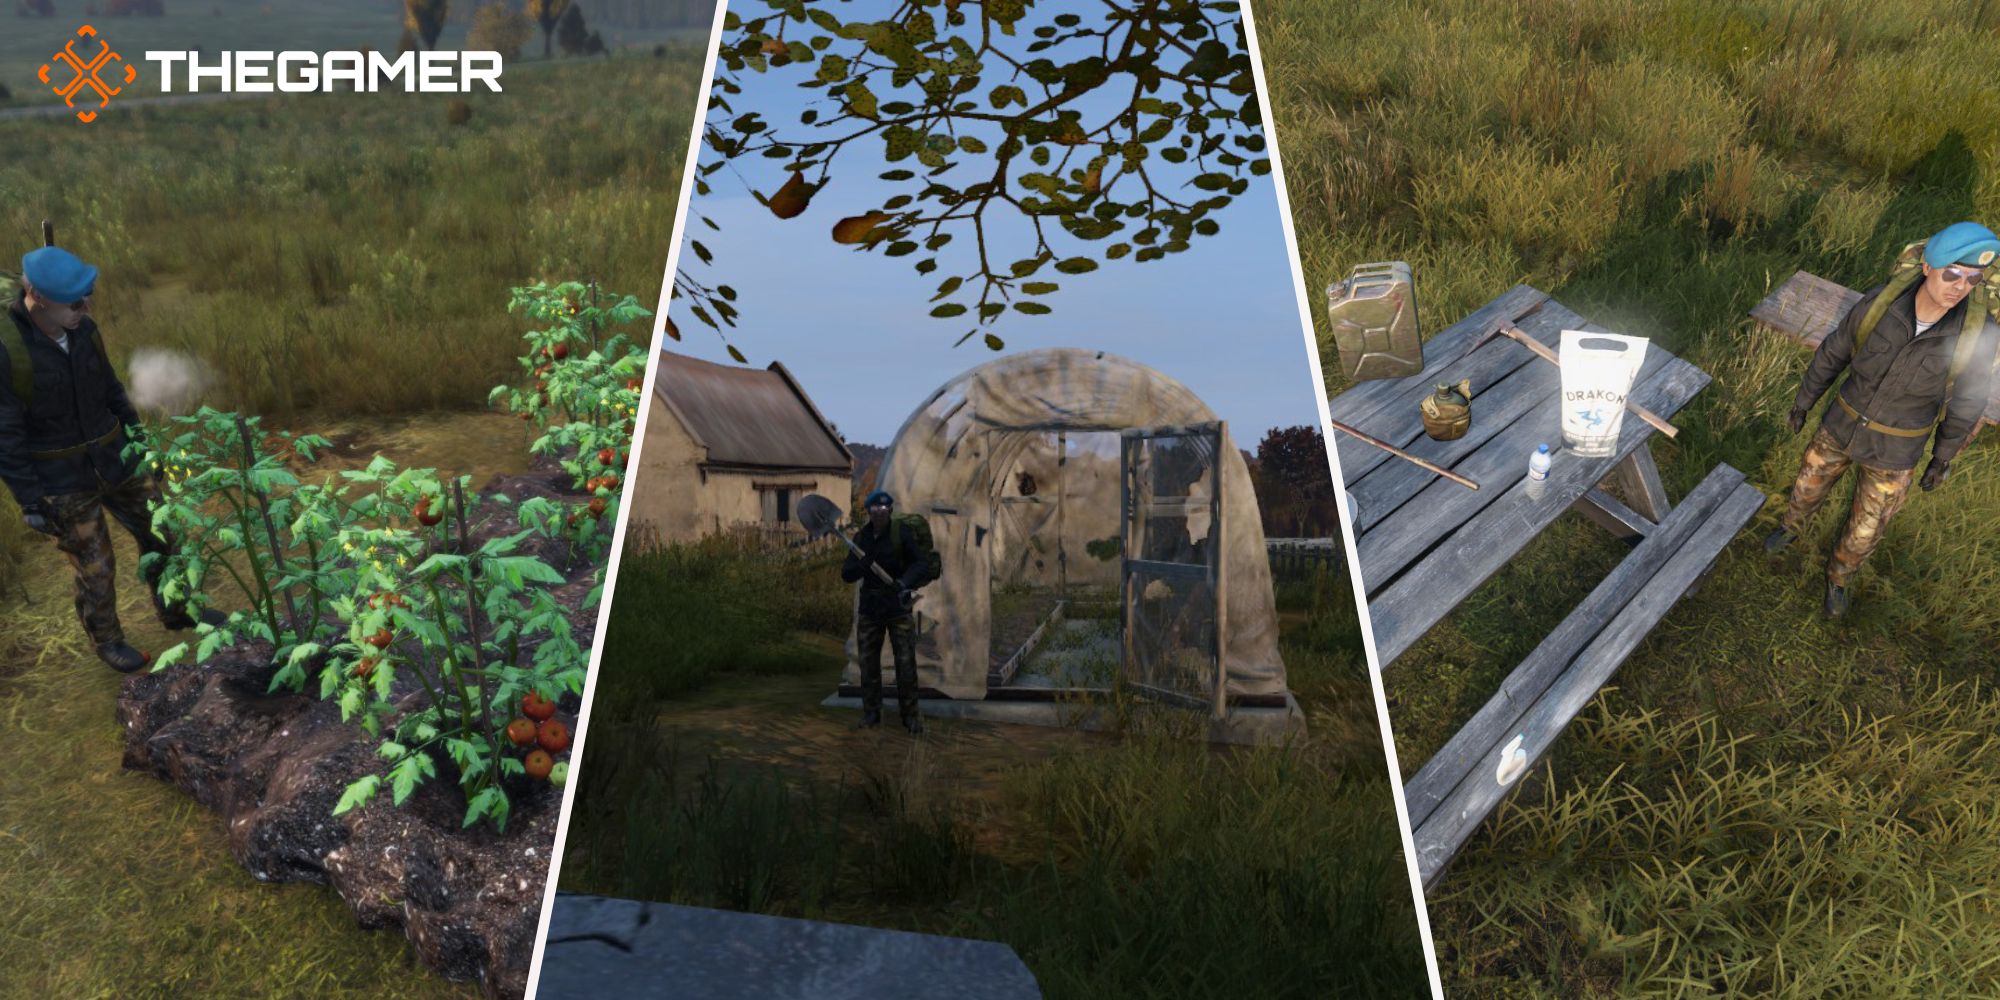 Pyramid Featured Image Consist of Greenhouse, Tomato Farm, and Farming Equipment Images